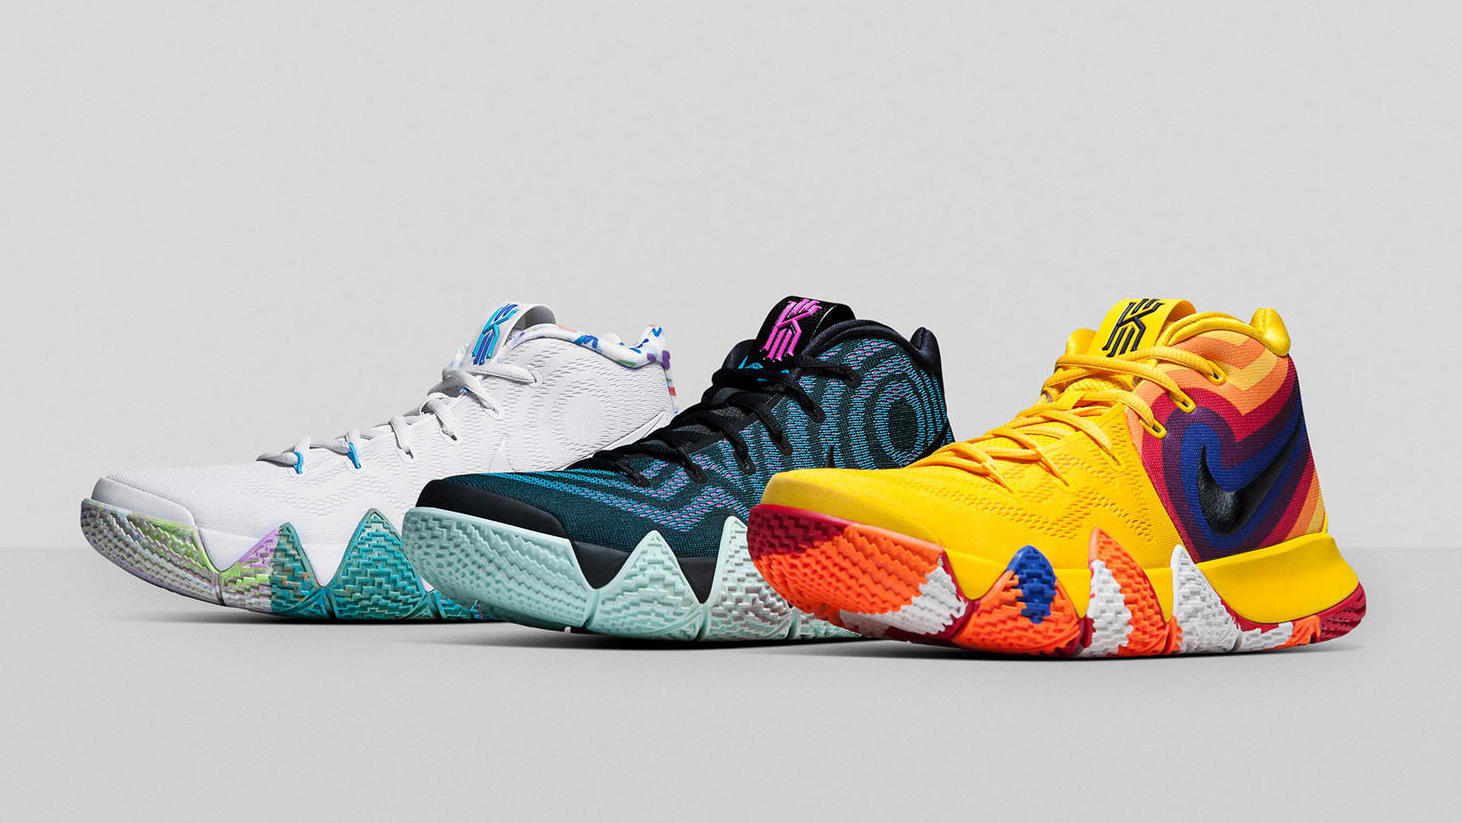 Nike Kyrie 4 Decades Pack